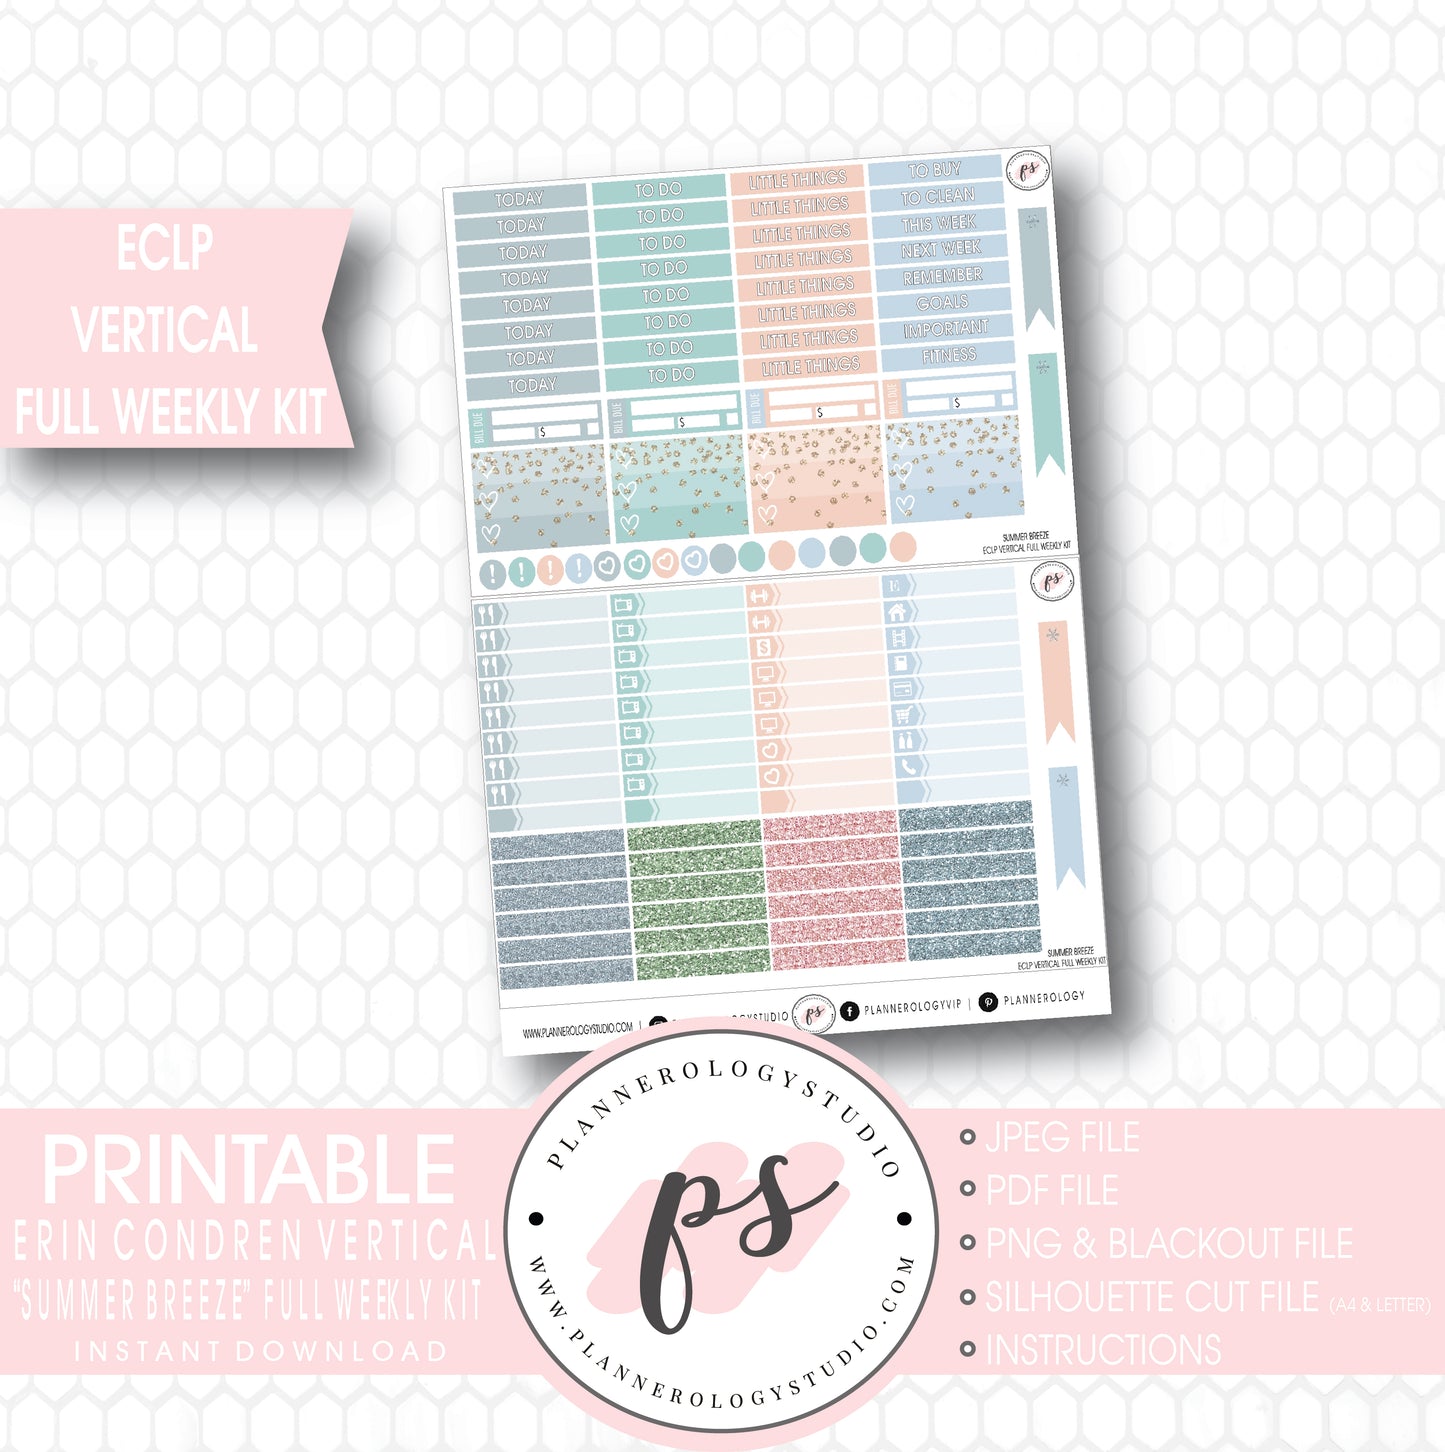 Summer Breeze Stock Photo Full Weekly Kit Printable Planner Stickers (for use with ECLP Vertical) - Plannerologystudio